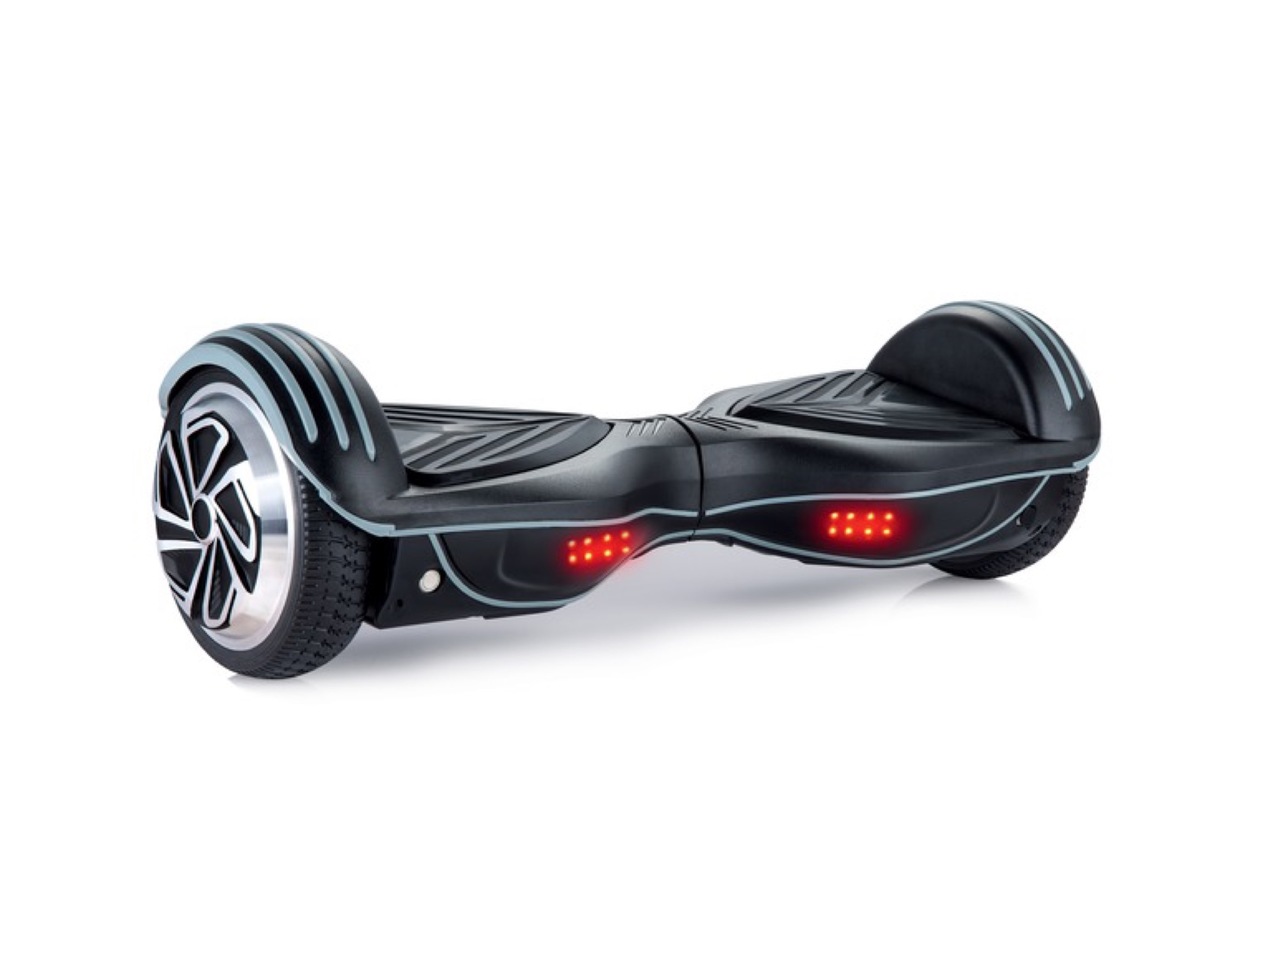 Hoverboard1